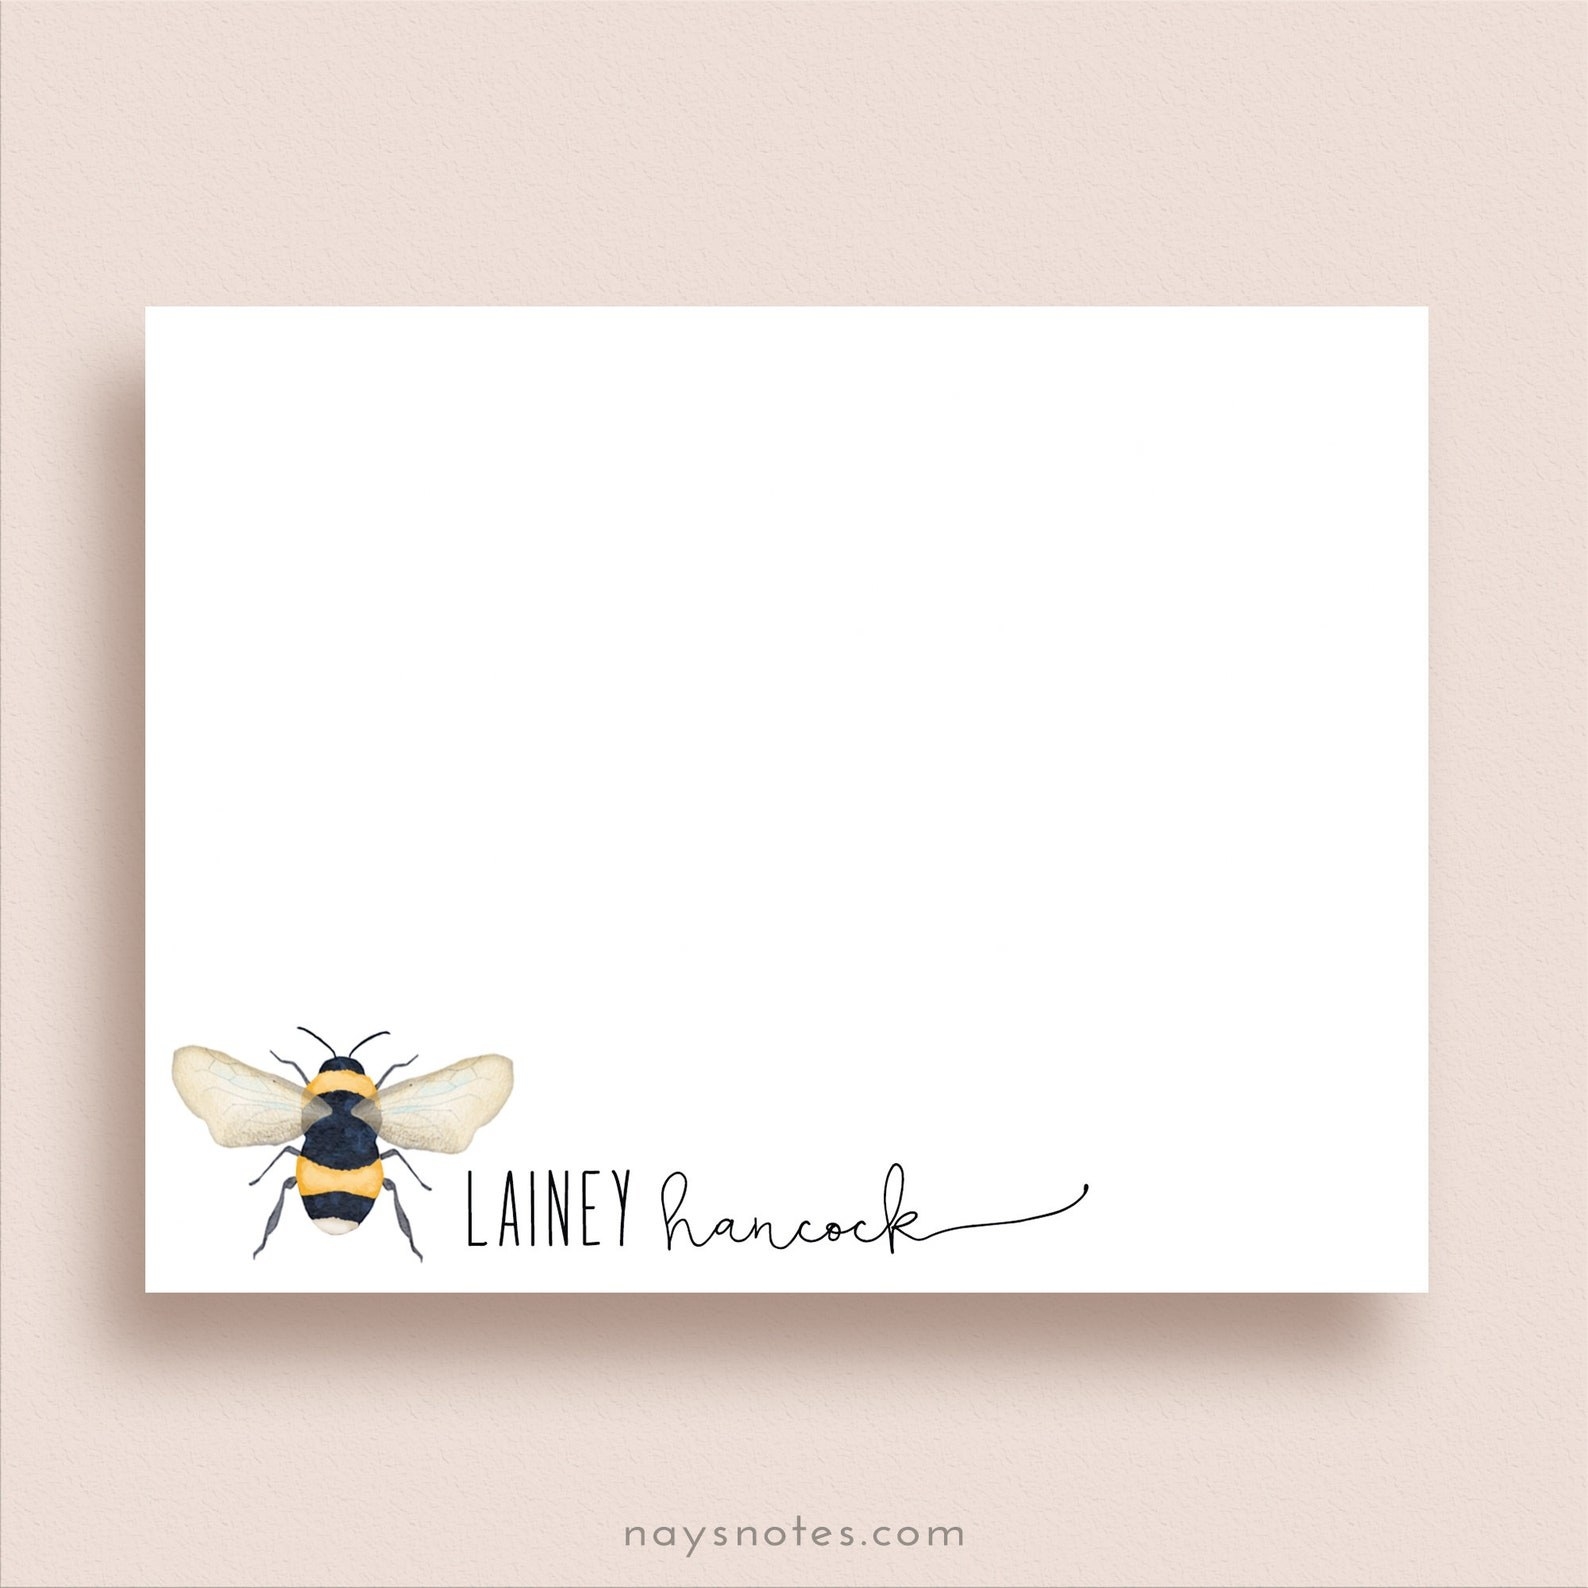 notecard with a bee illustration on it